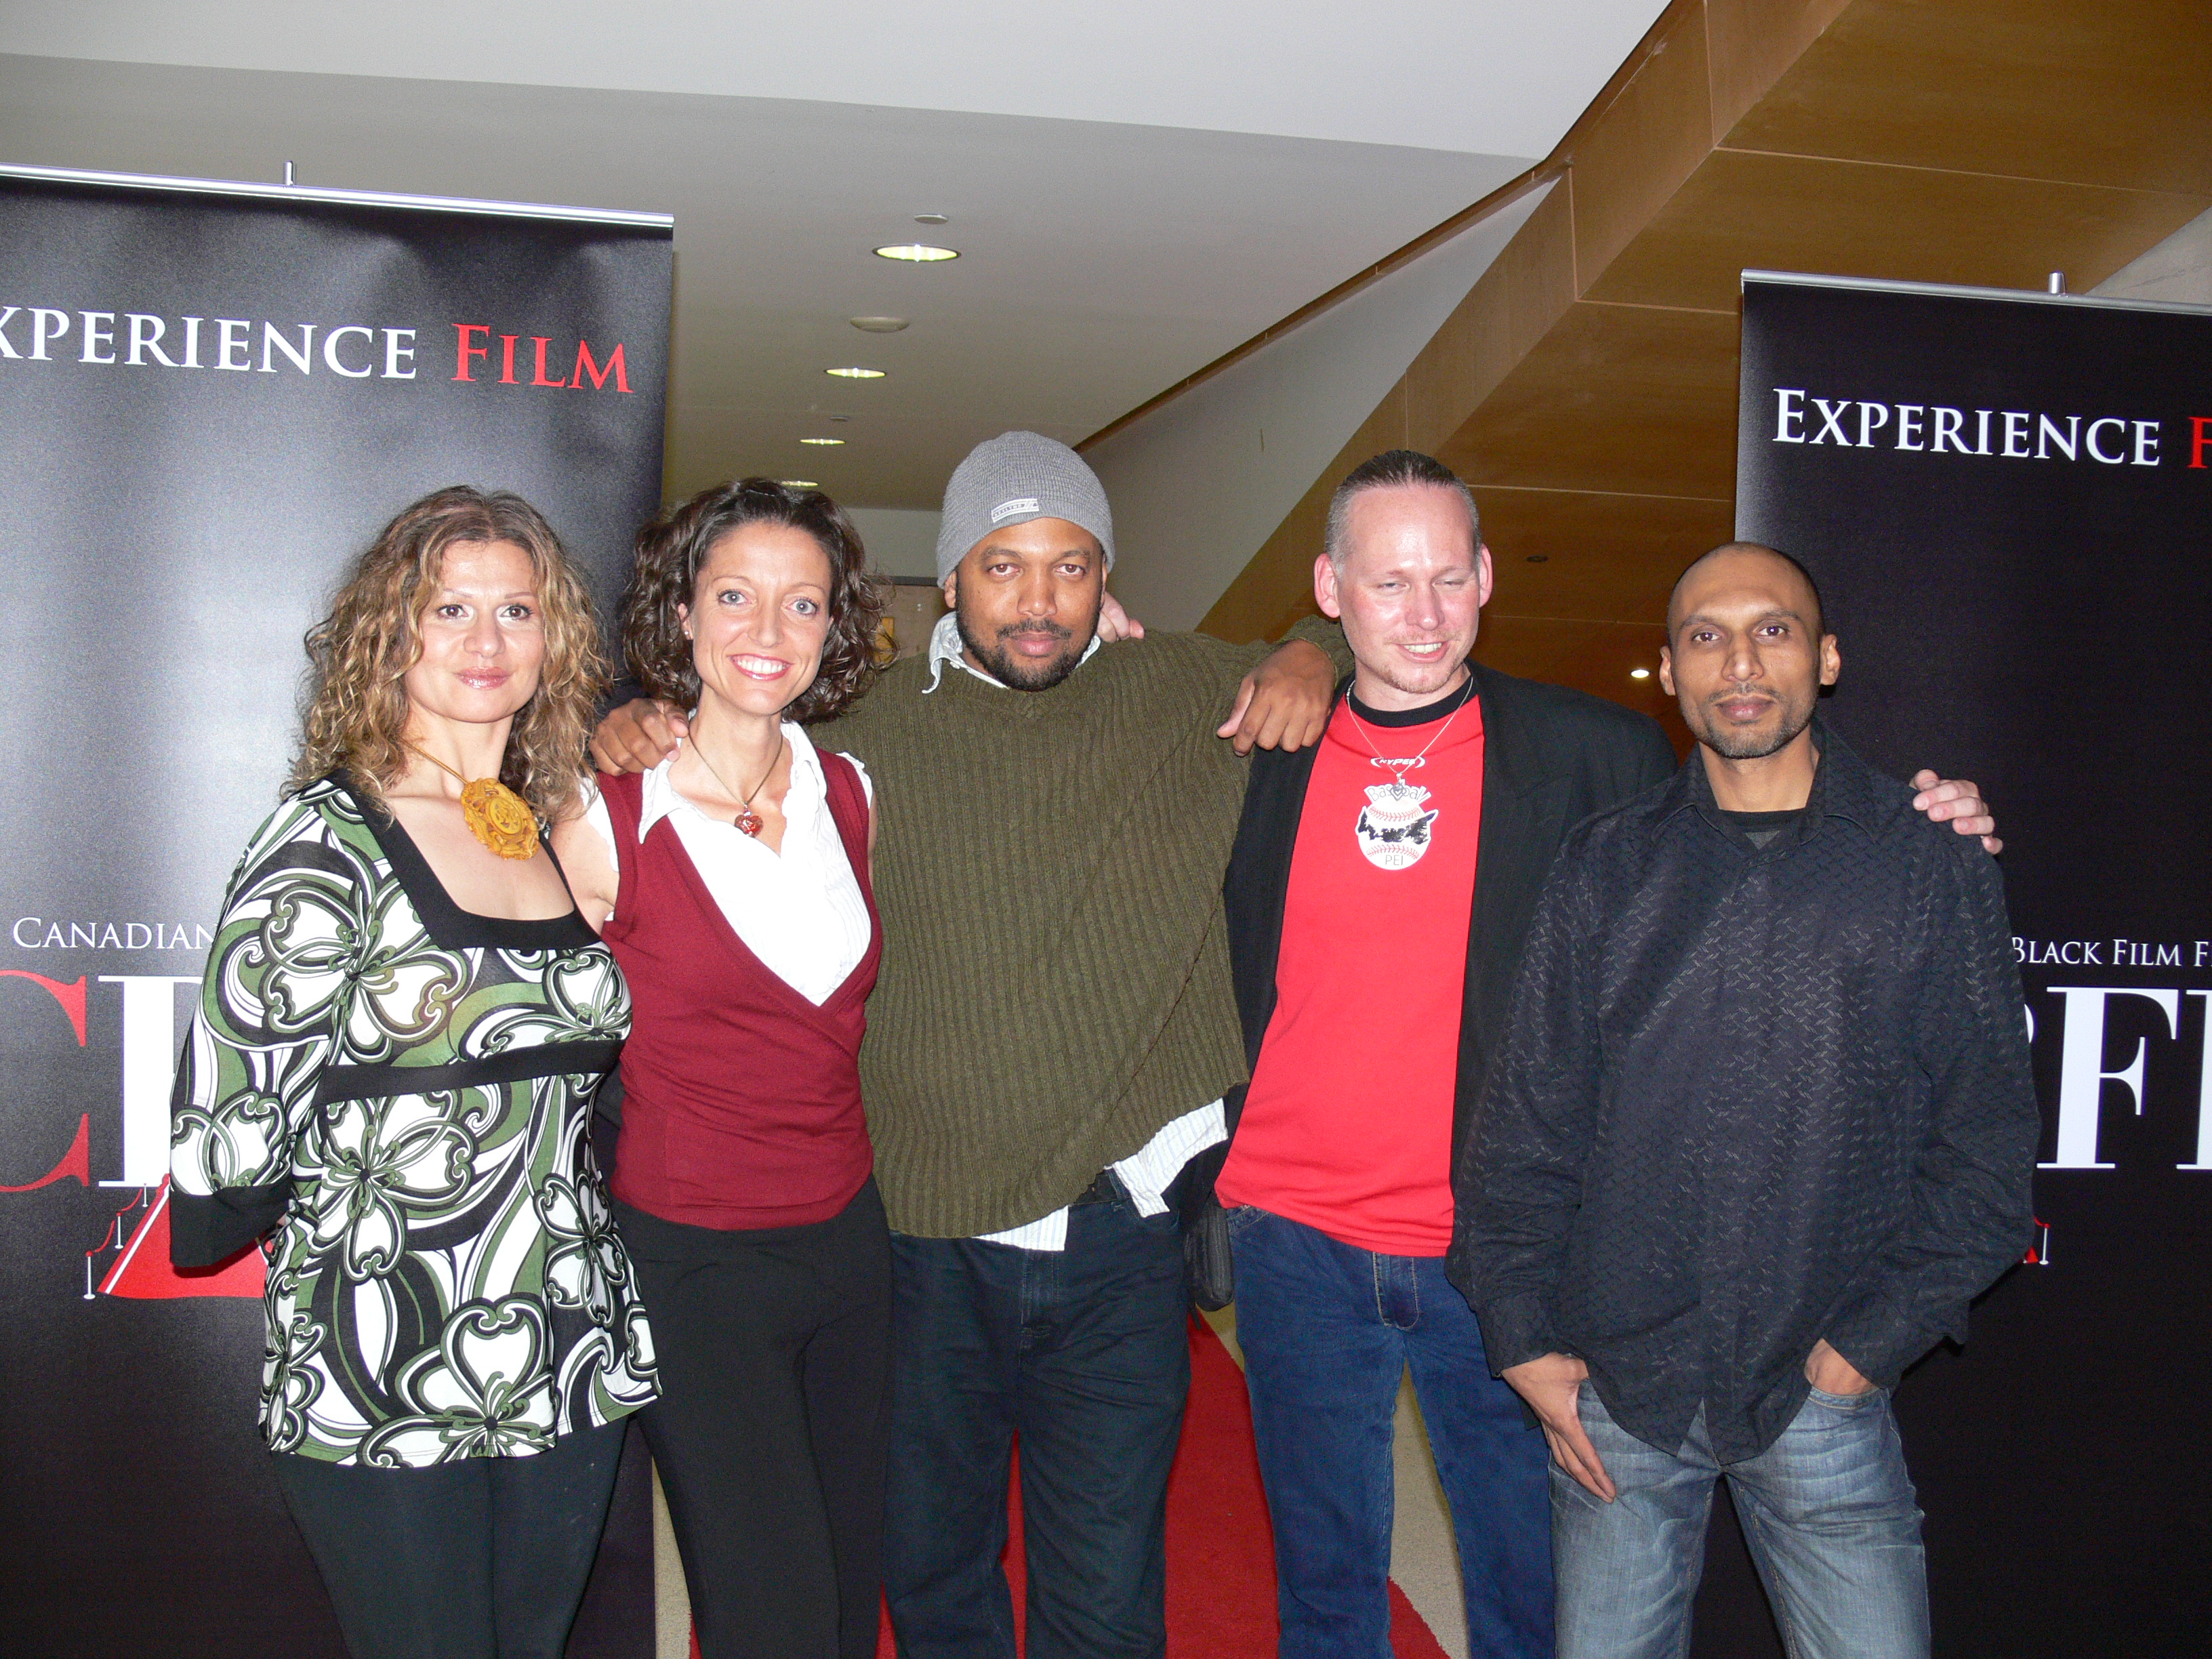 some cast and crew from my films. Two of my films opened and closed the Canadian Black Film Festival CBFF which screened at Ryerson University and the Ontario Art Gallery.